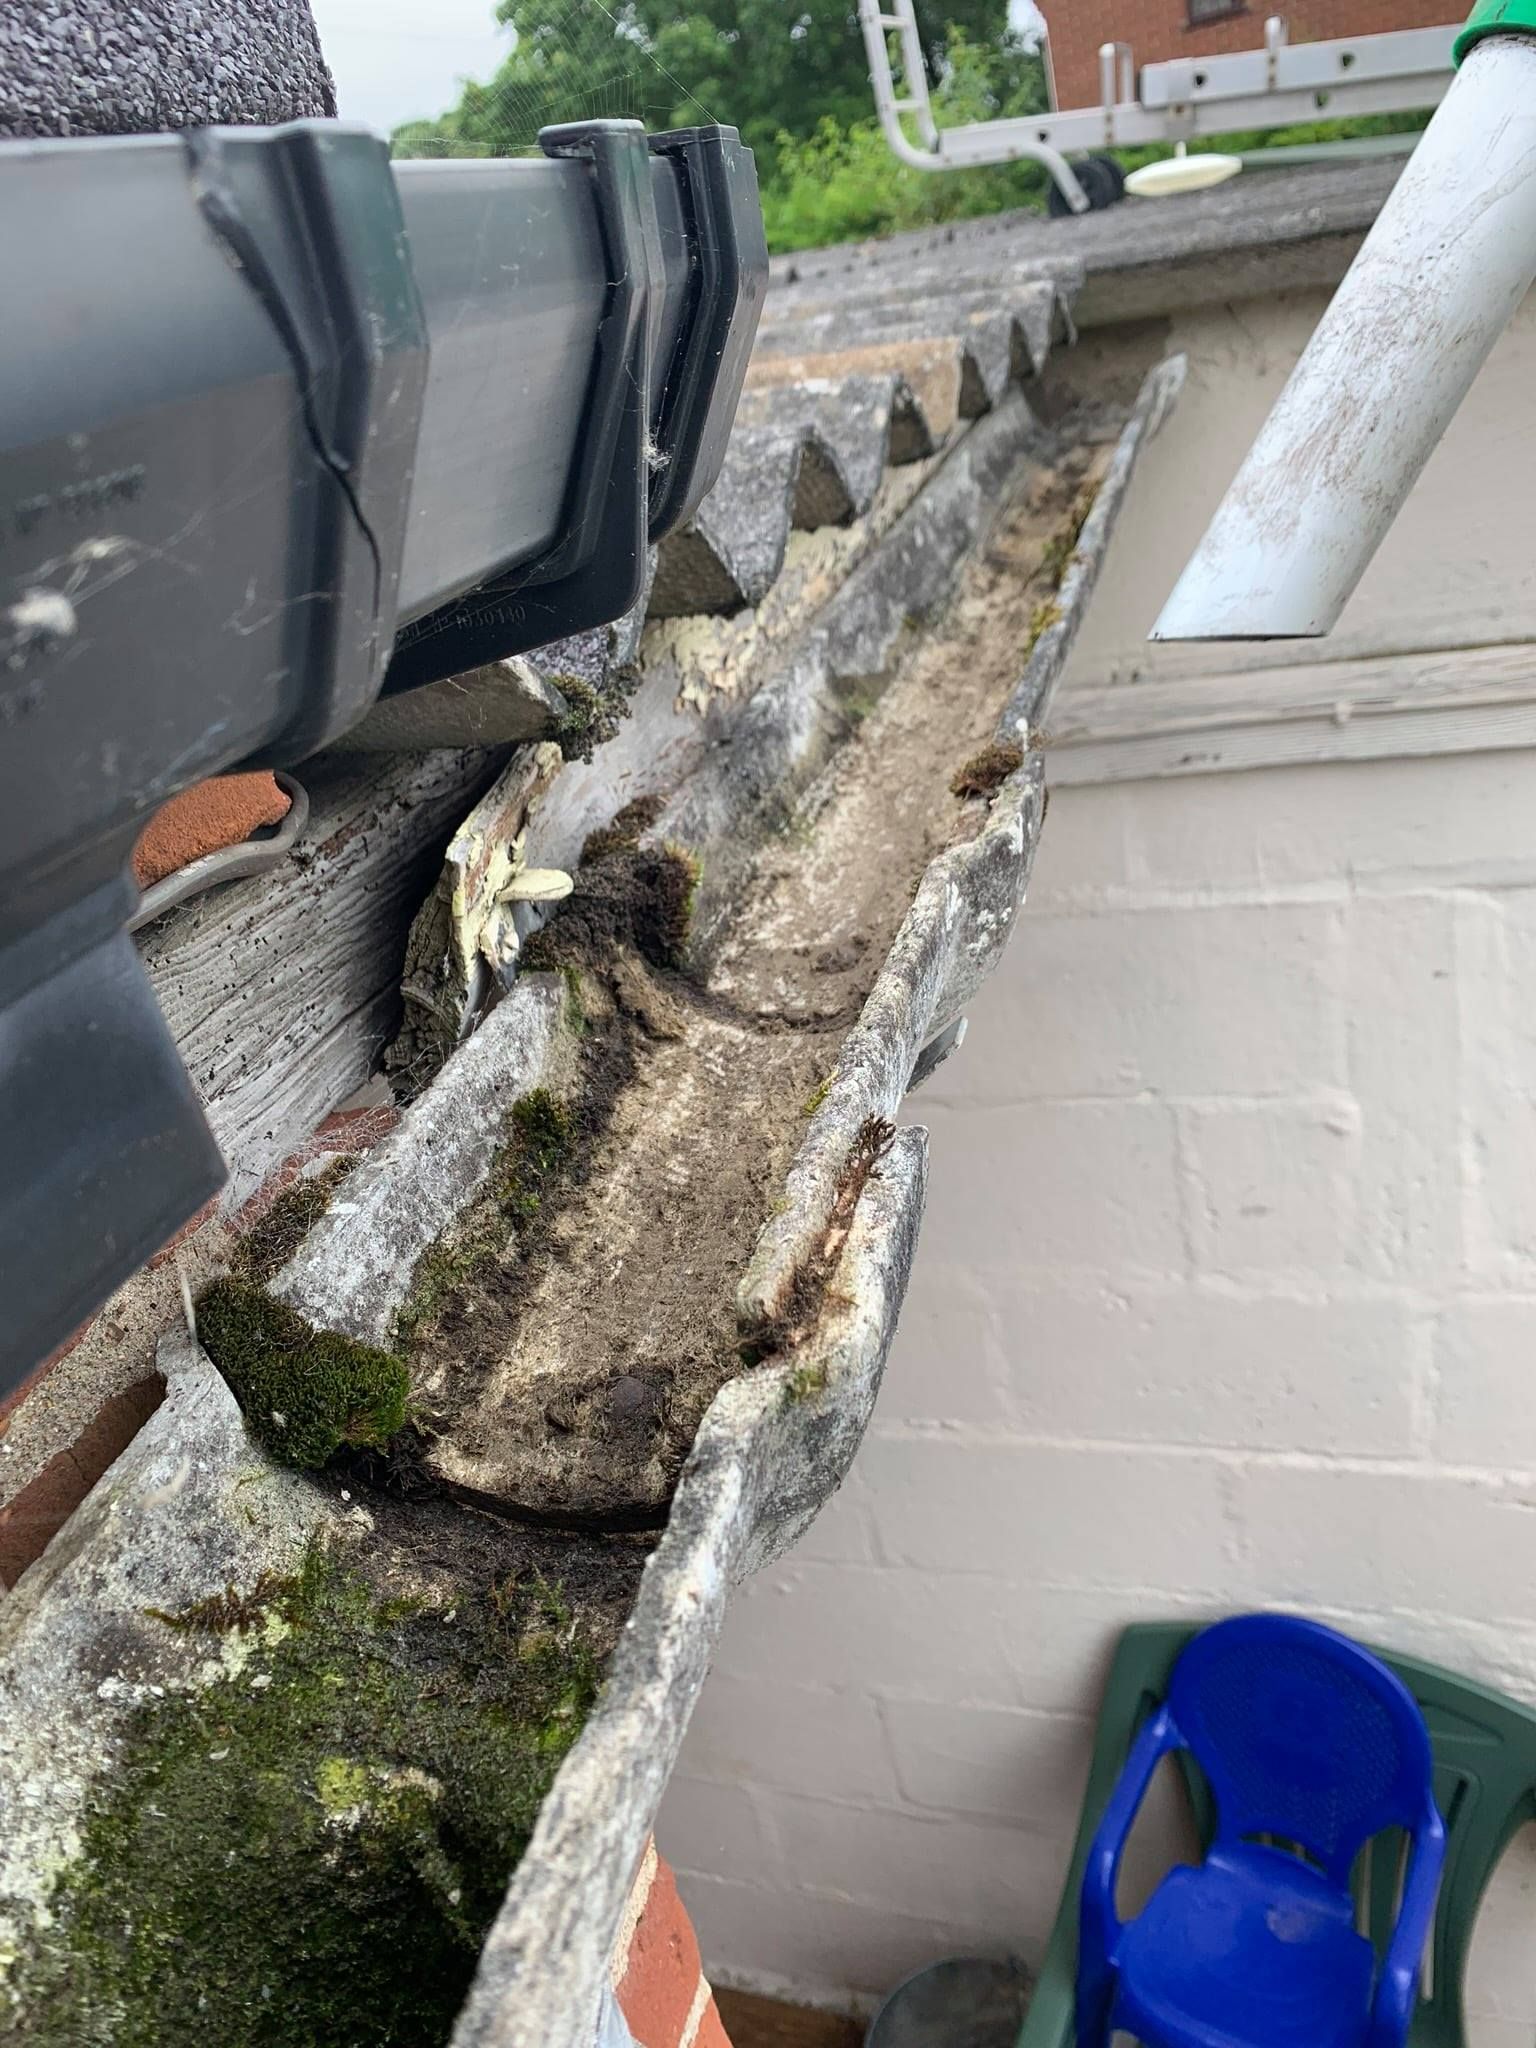 Close-up of the same gutter, now cleared of most moss and debris, next to the drainpipe on the roof, with a cleaner appearance.